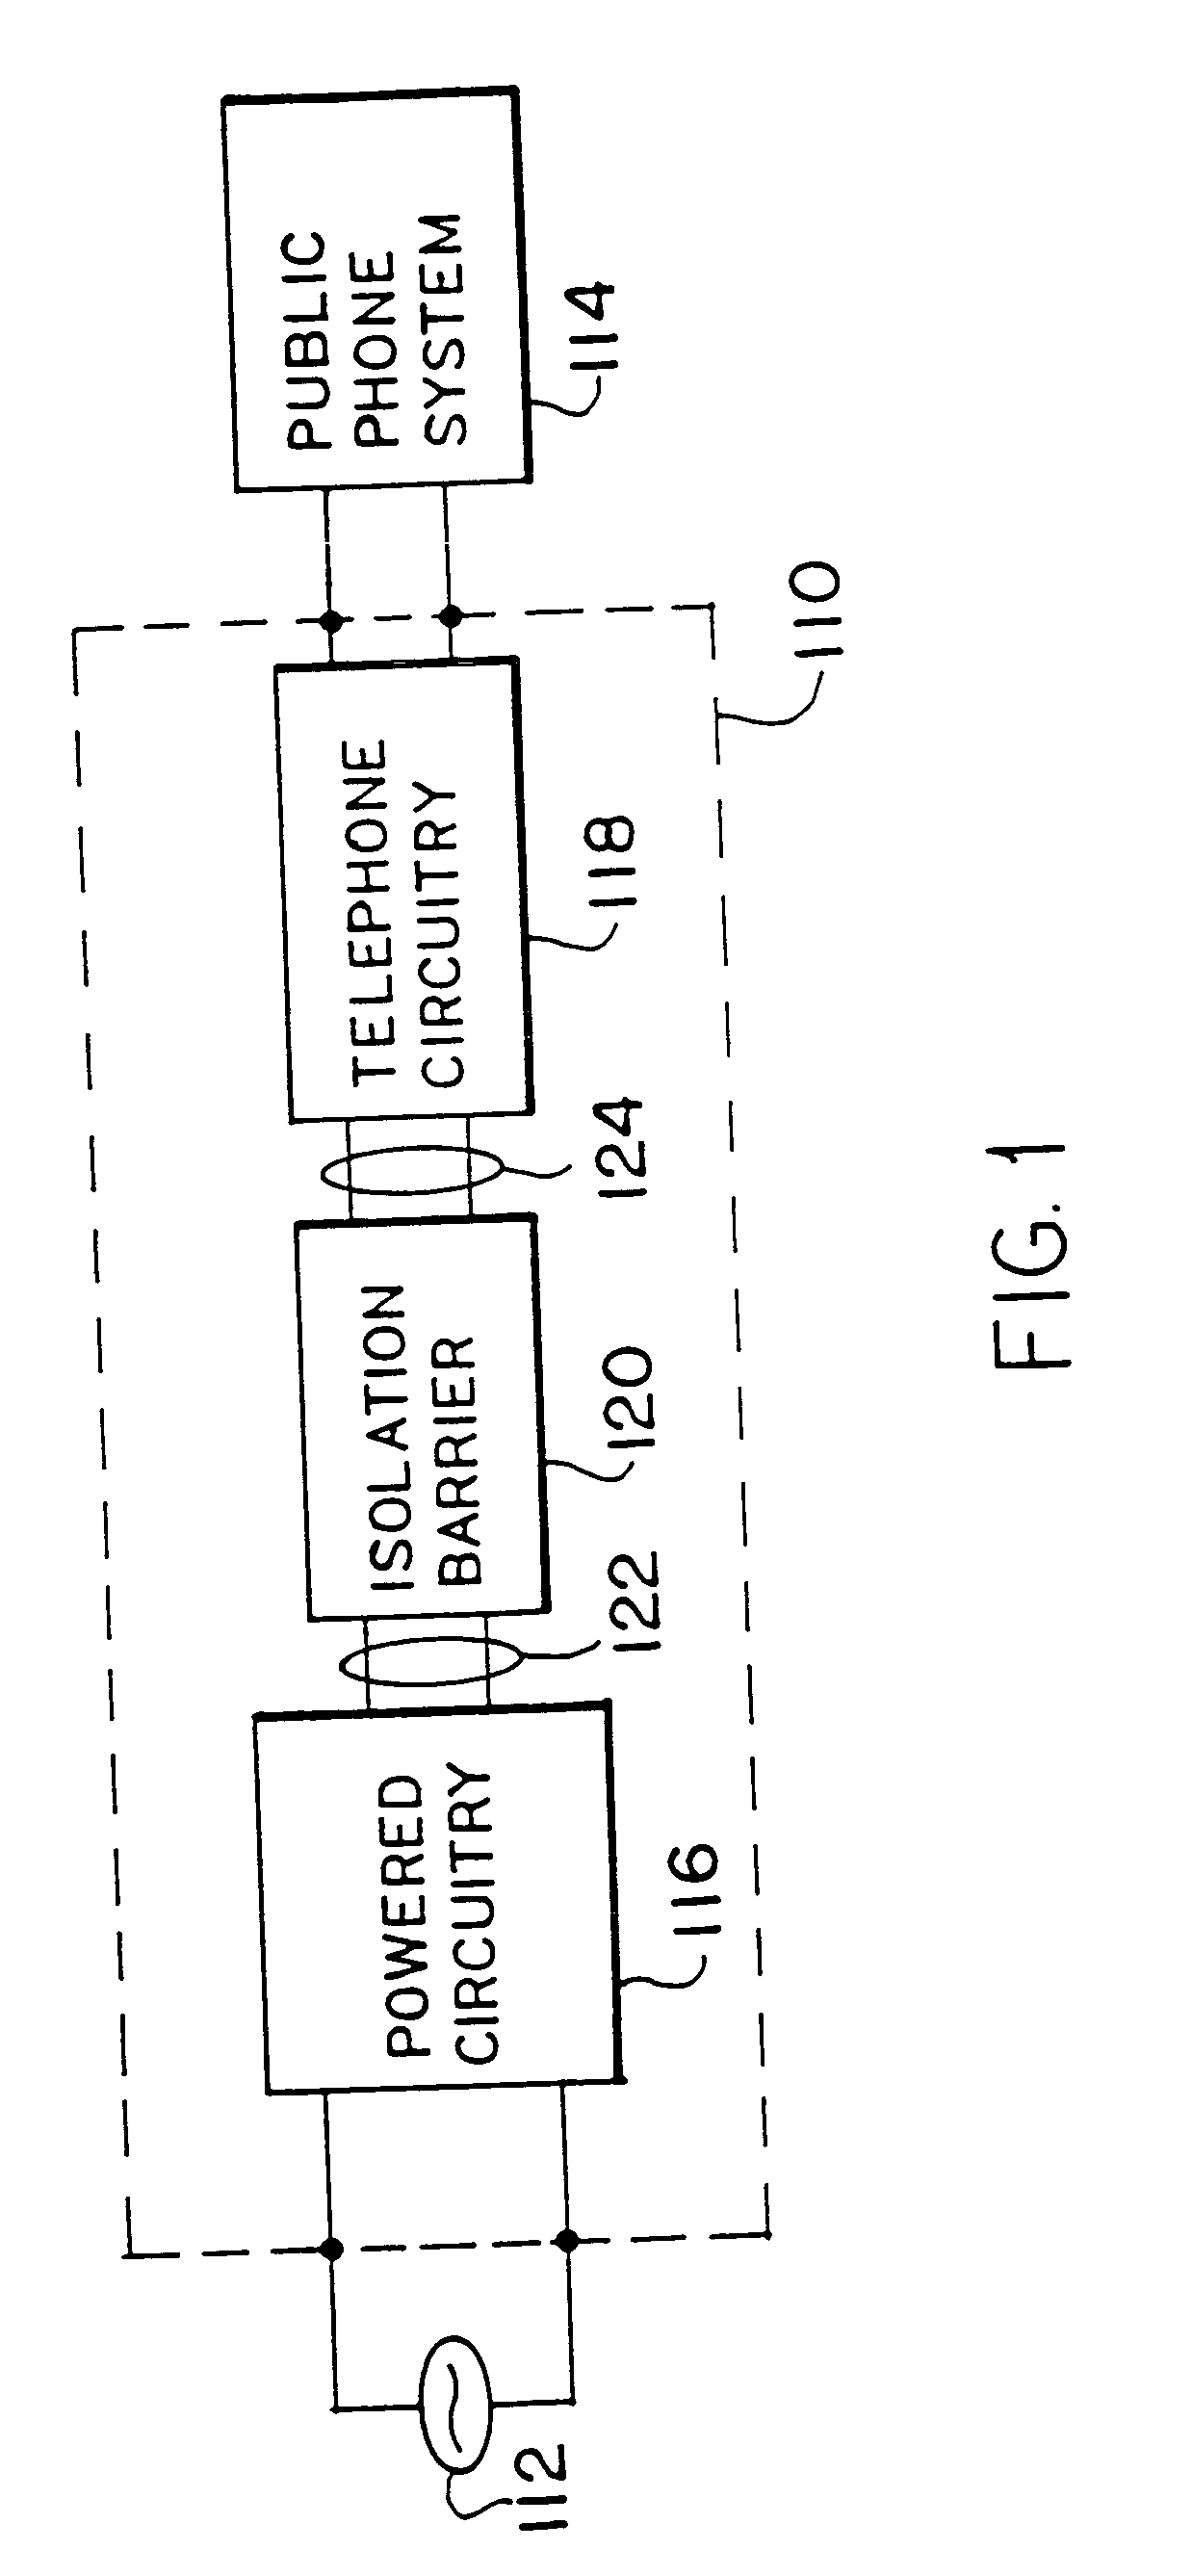 Digital access arrangement circuitry and method for connecting to phone lines having a DC holding circuit with programmable current limiting